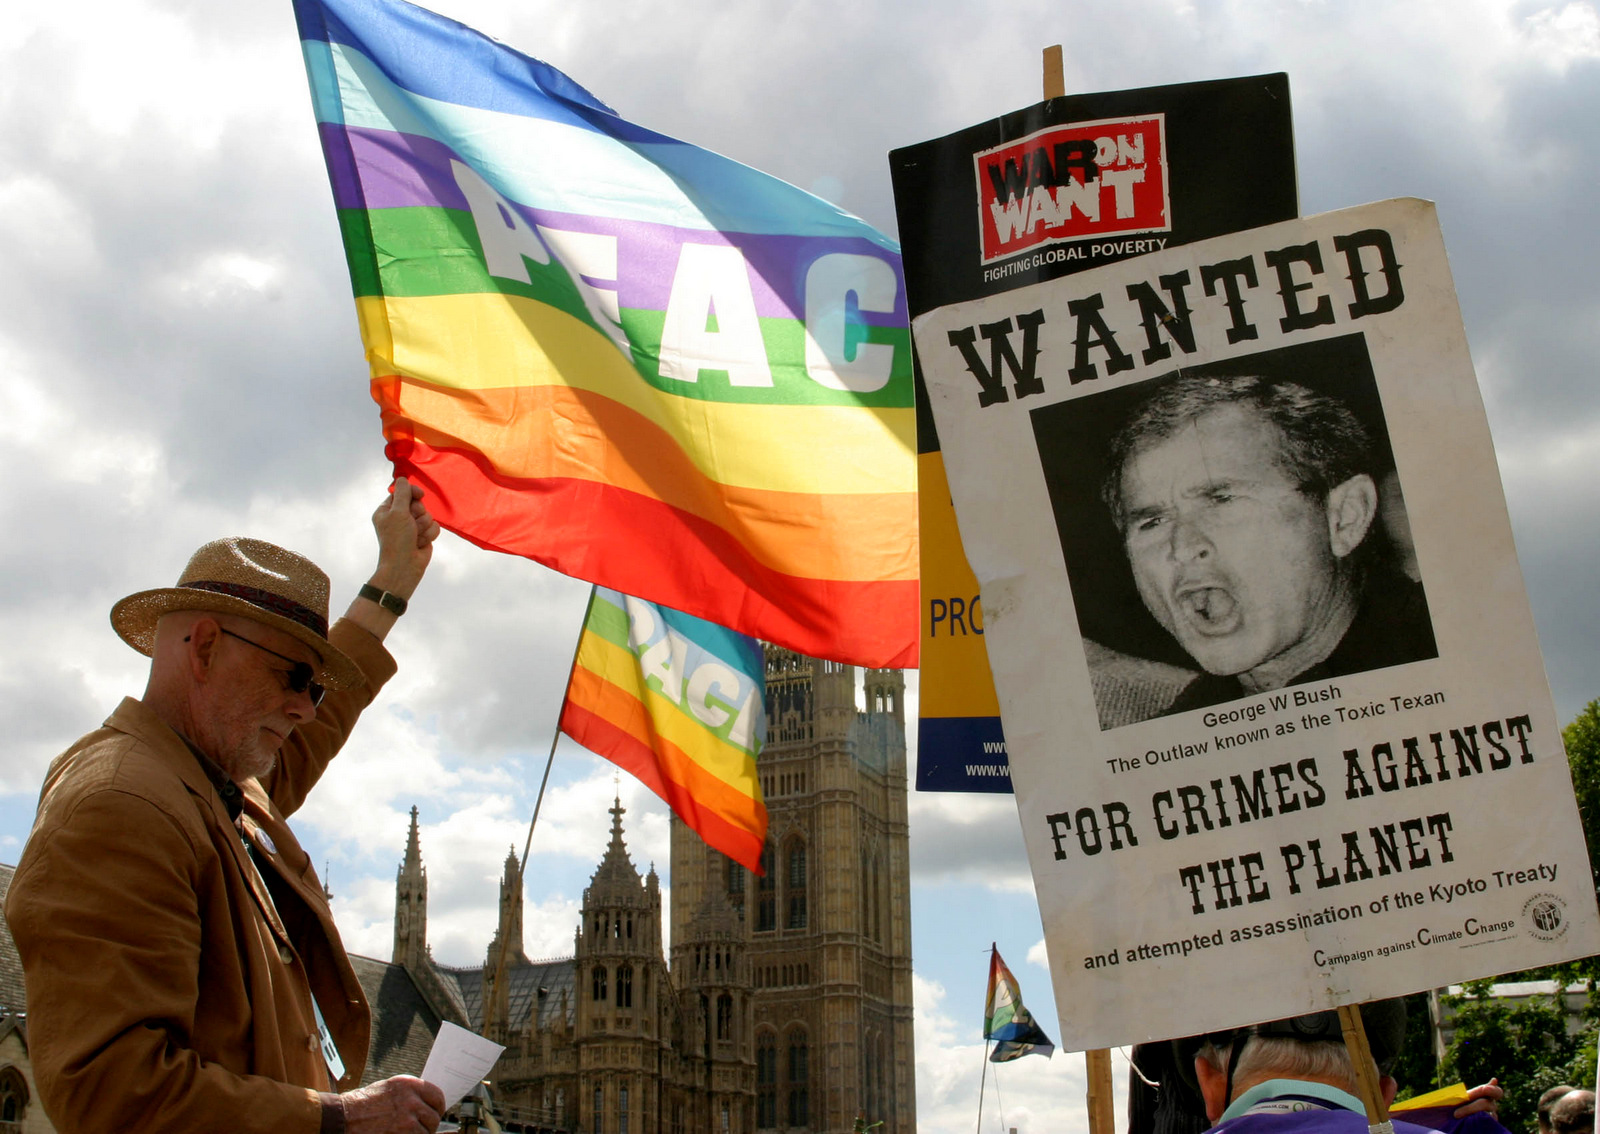 A protester holds up a peace flag next to a wanted poster of U.S. President George W. Bush during a demonstration at Westminster Square in London, Sunday, Aug. 7, 2005. (AP/Sergio Dionisio)